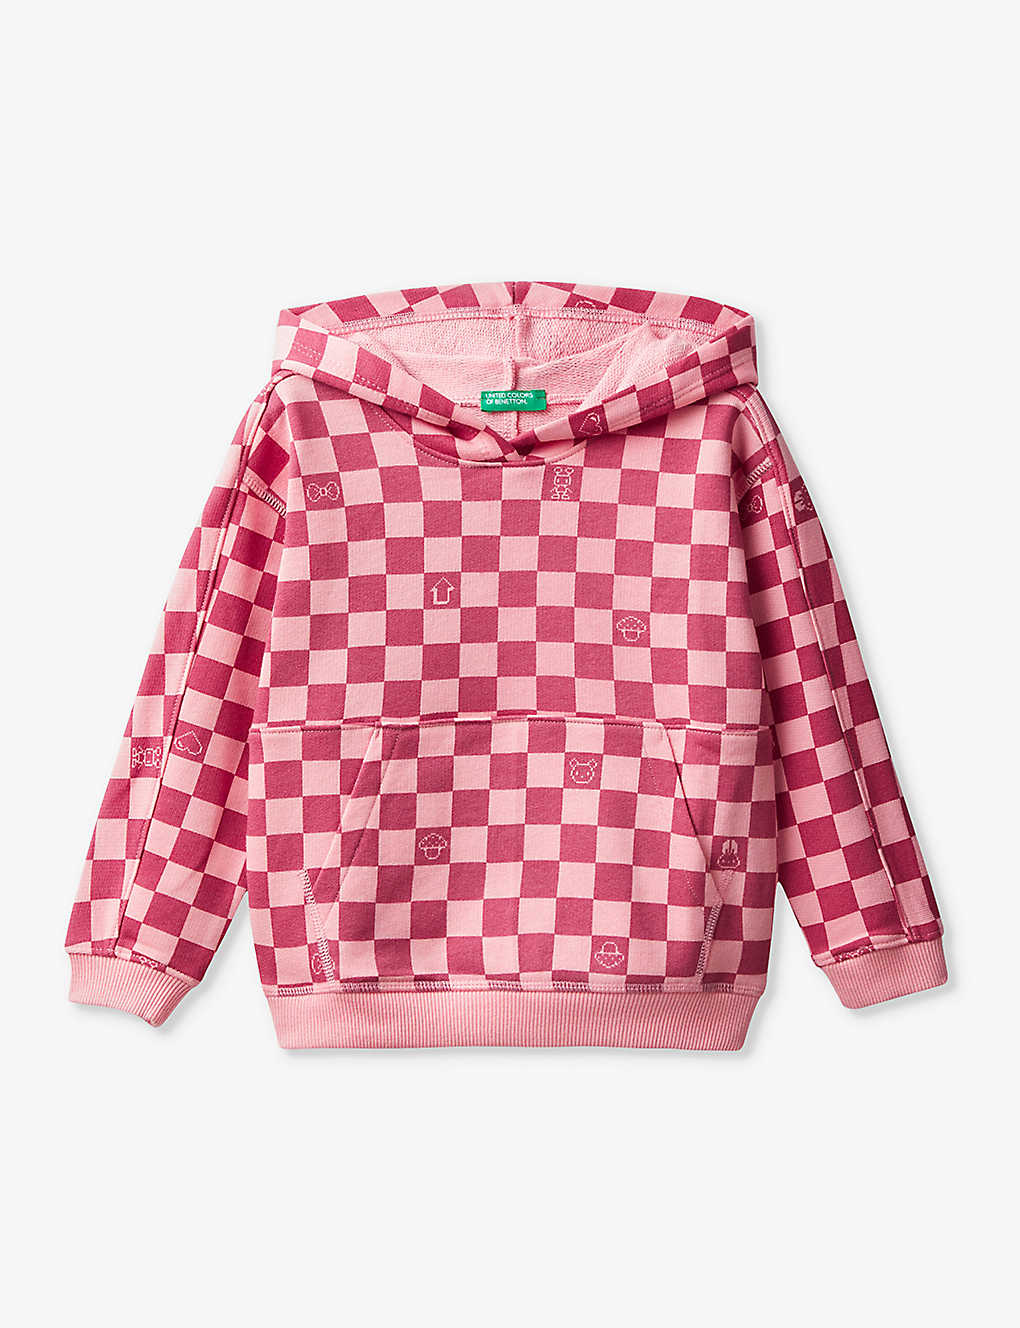 Benetton Kids' Checkerboard-print Cotton Hoody 18 Months - 6 Years In Pink Check